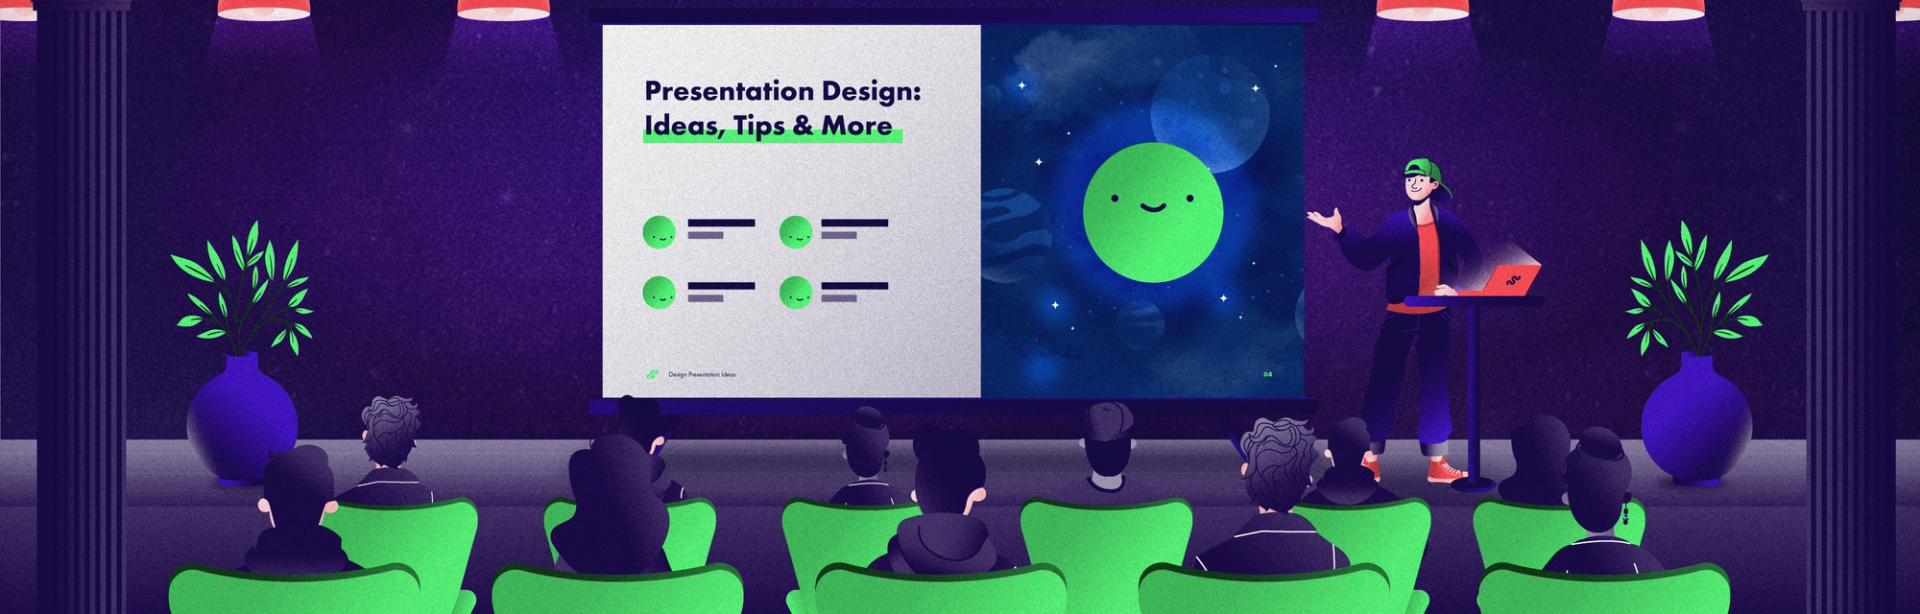 Stand Out With These 5 Presentation Design Ideas